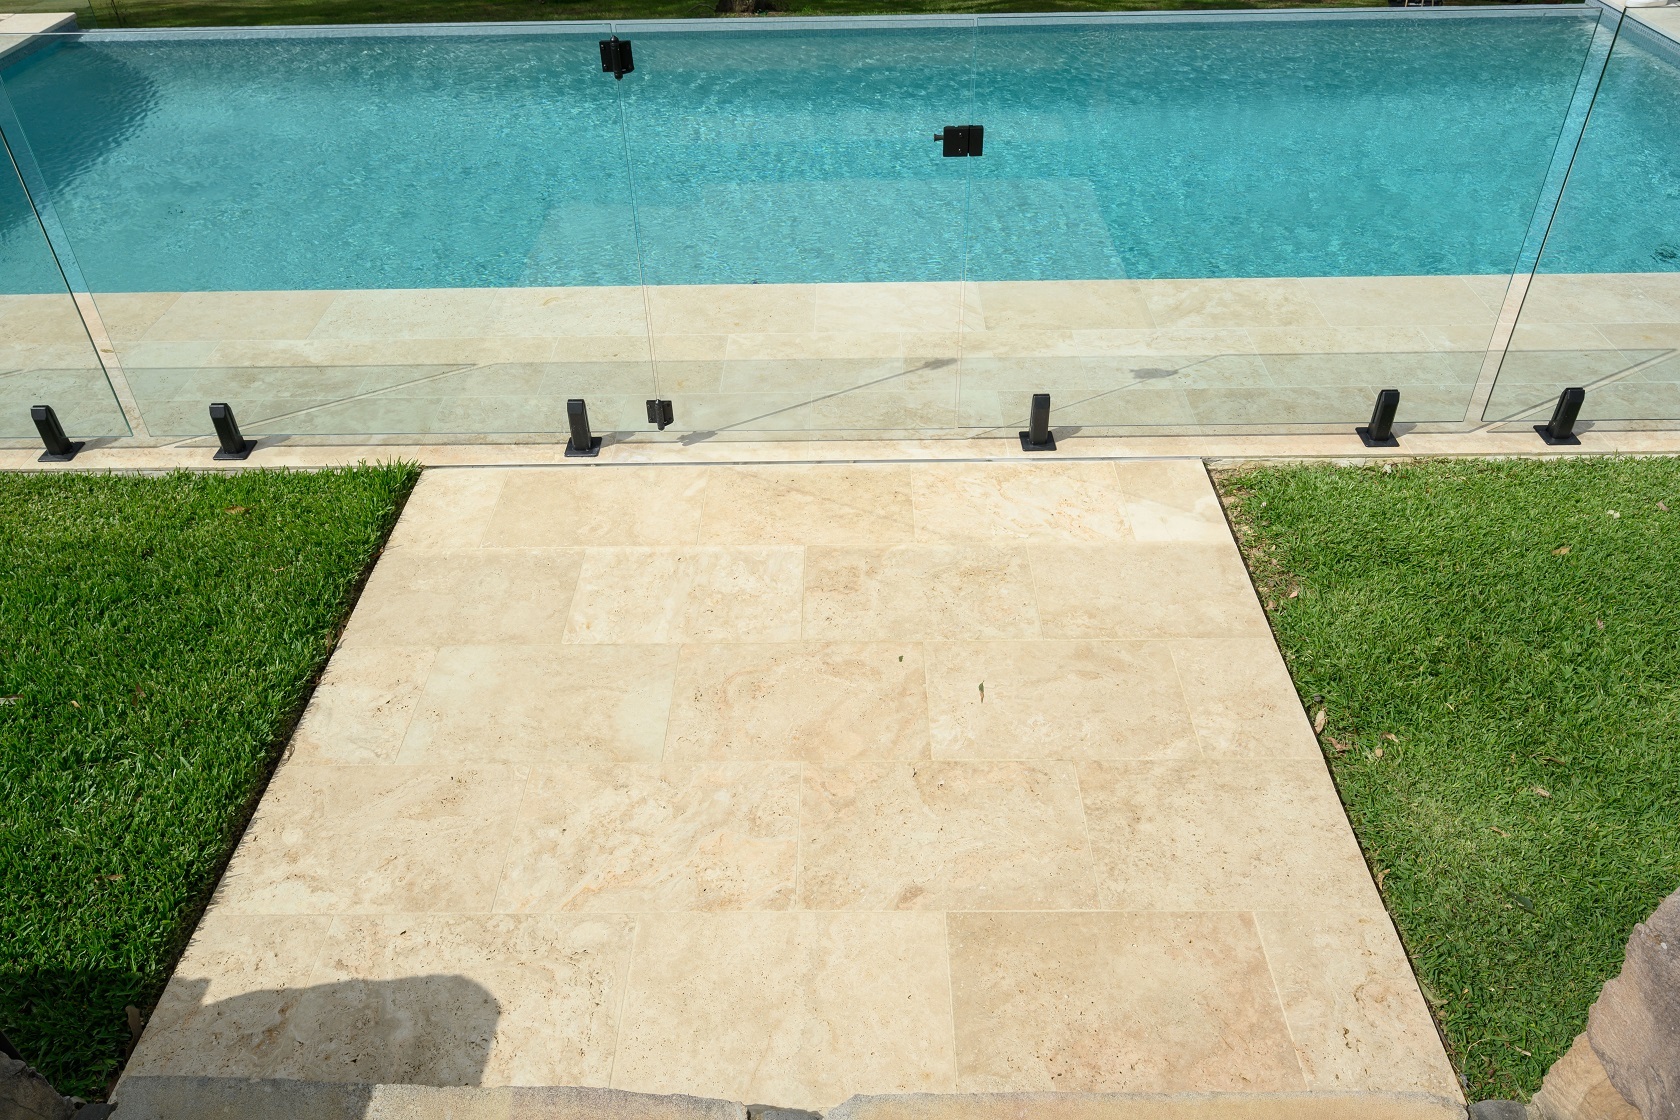 Linen Travertine pool coping and surrounds with Gunmetal Blue waterline tile